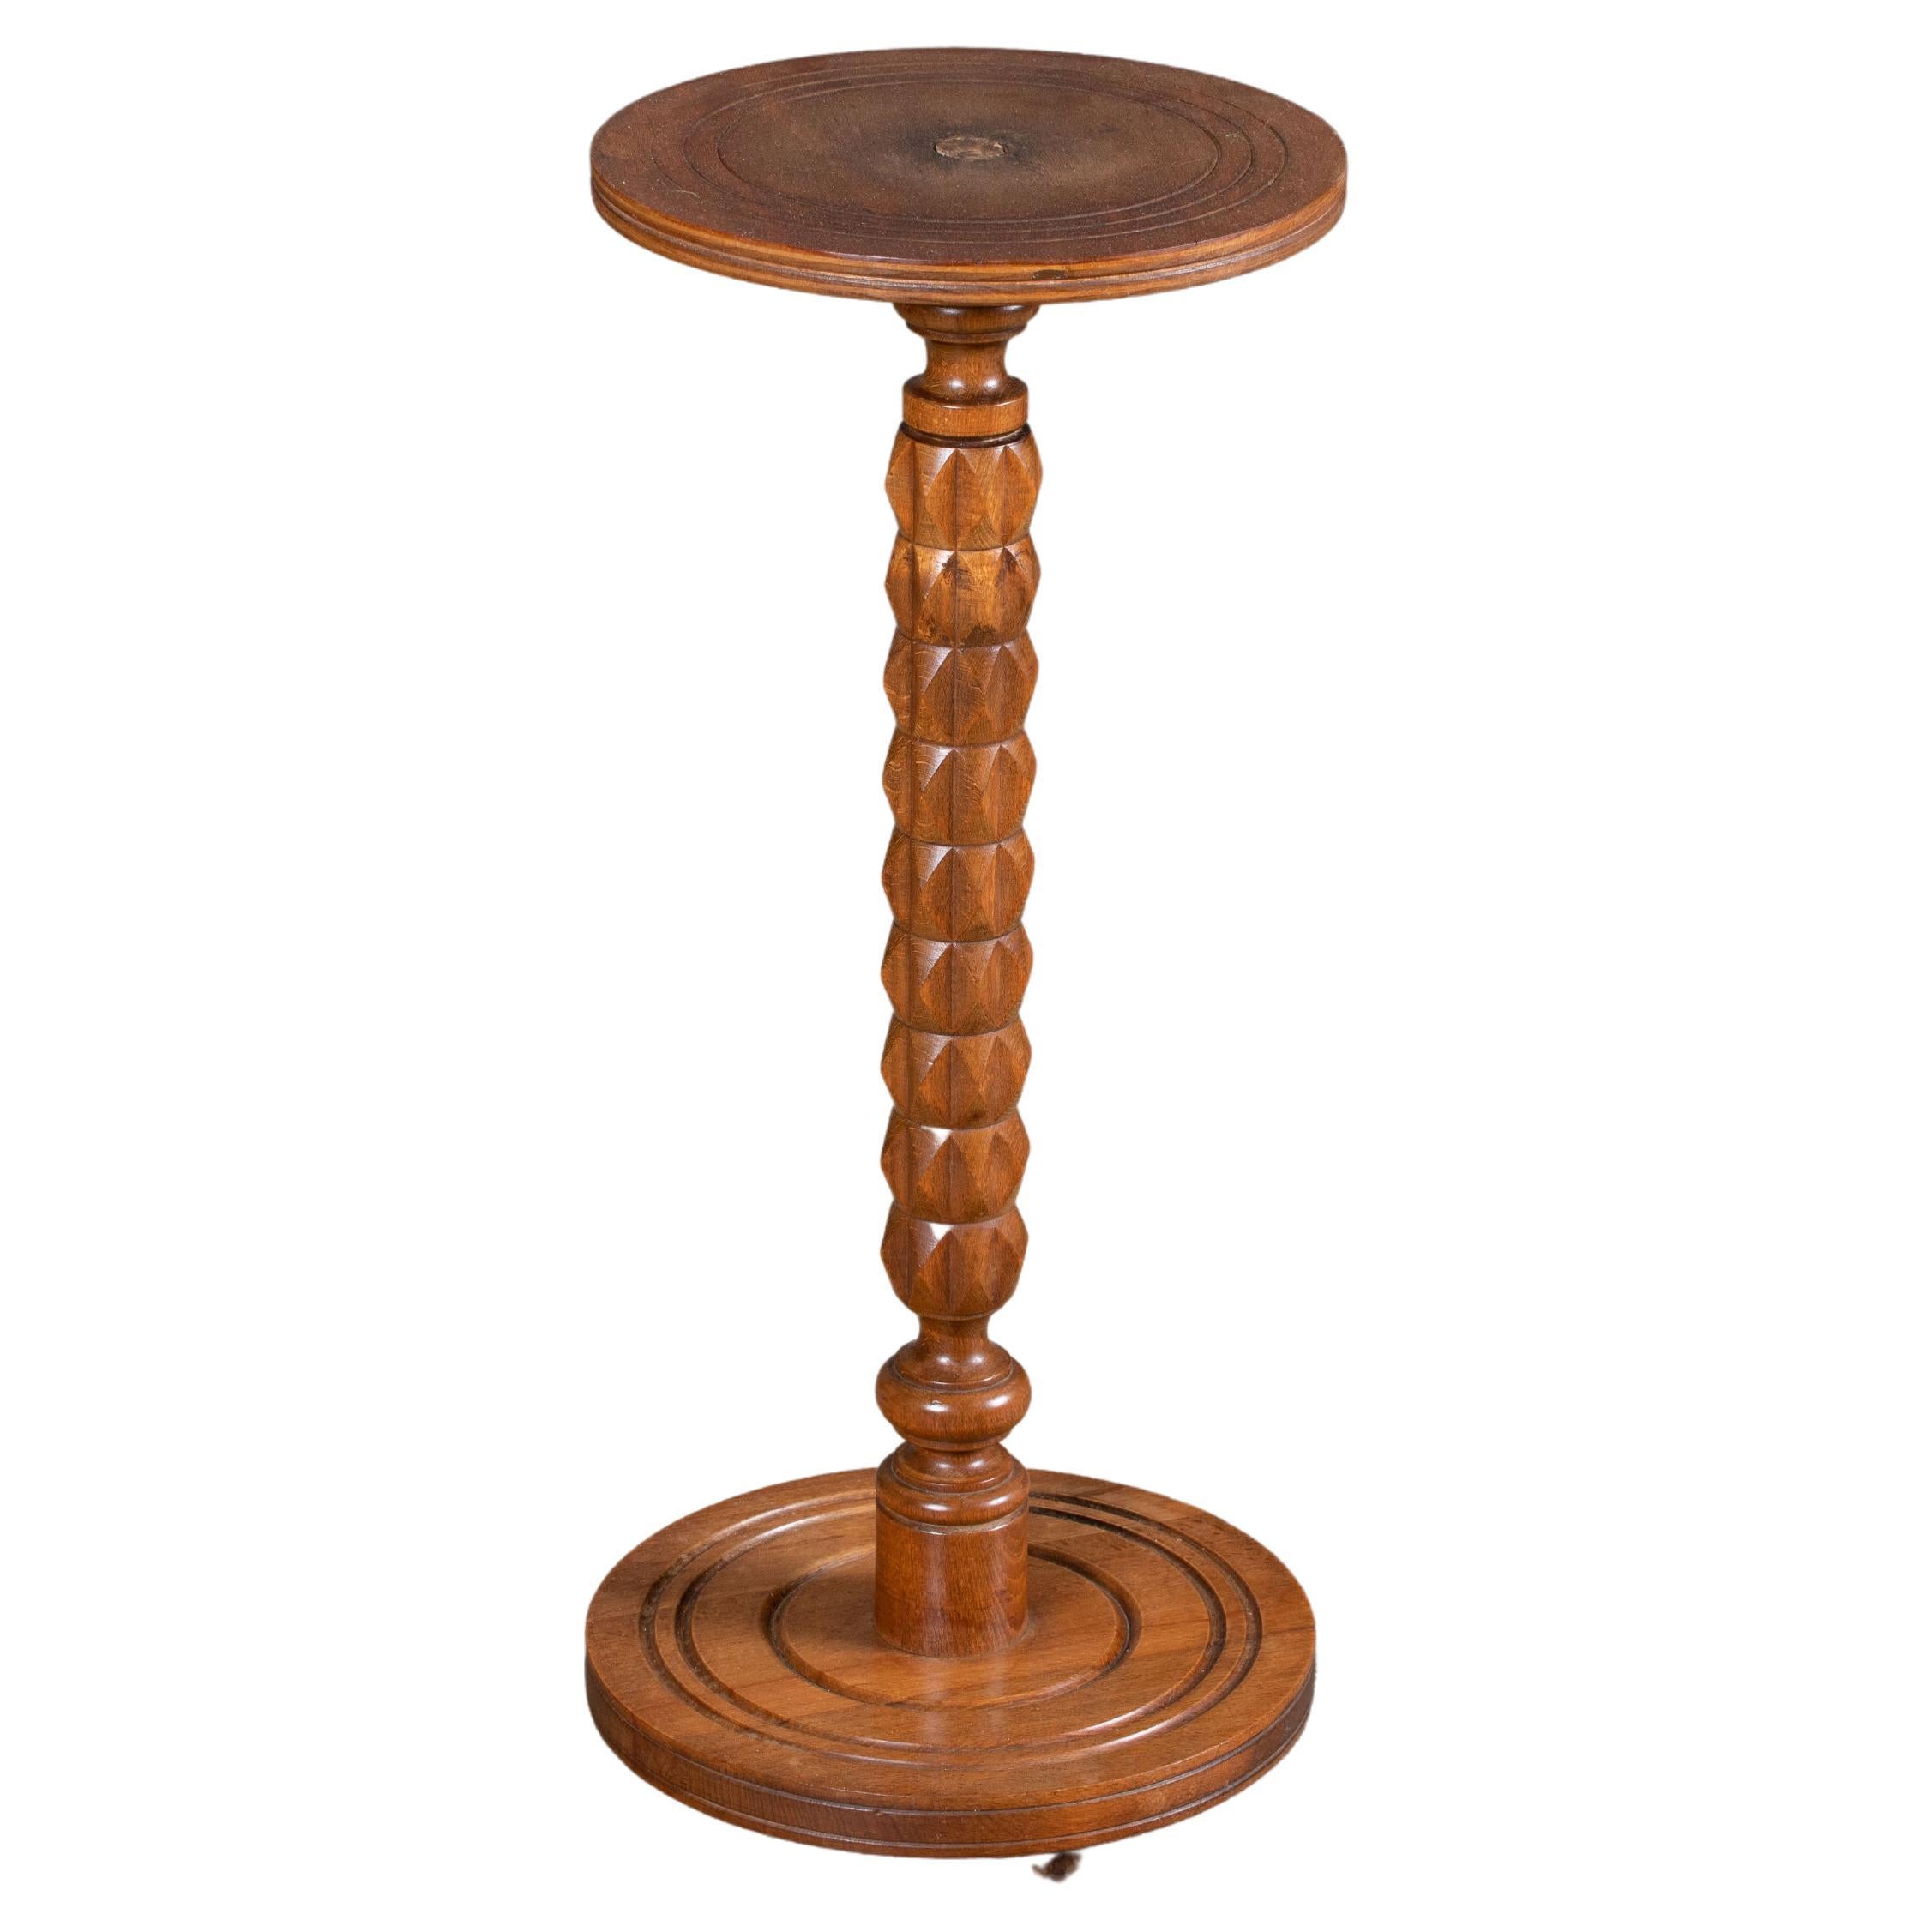 Beautiful carved wood pedestal attributed to Charles Dudouyt, made in France, 1940's. Dark wood finish with circular top and four leg base.
A major figure in early 20th-century French design, Charles Dudouyt moved France’s design aesthetic from an